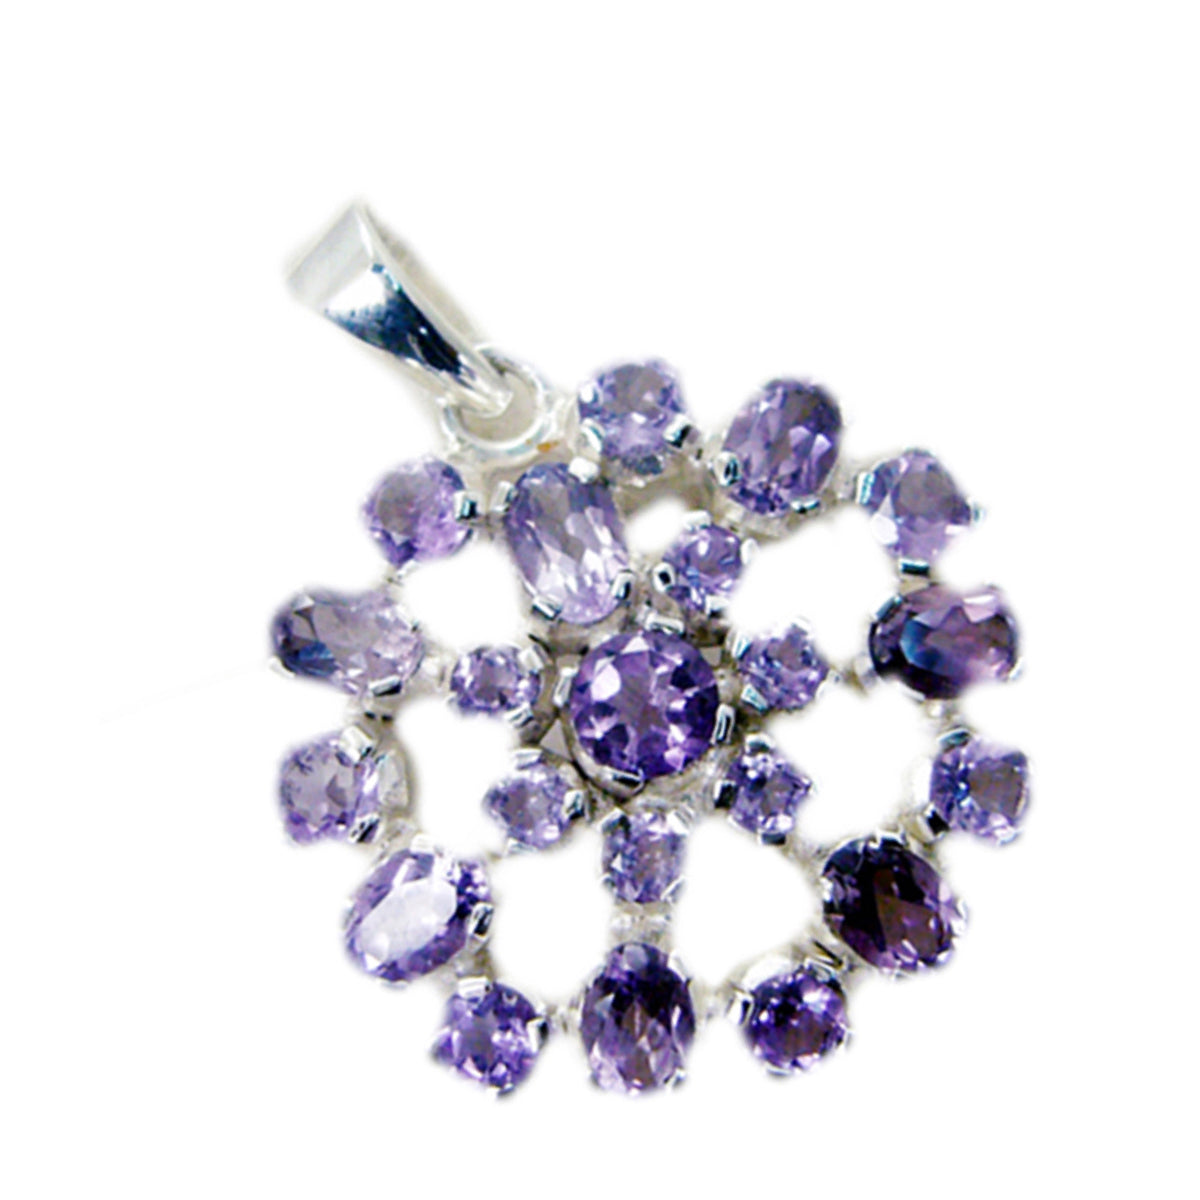 Riyo Delightful Gems Multi Faceted Purple Amethyst Silver Pendant Gift For Boxing Day